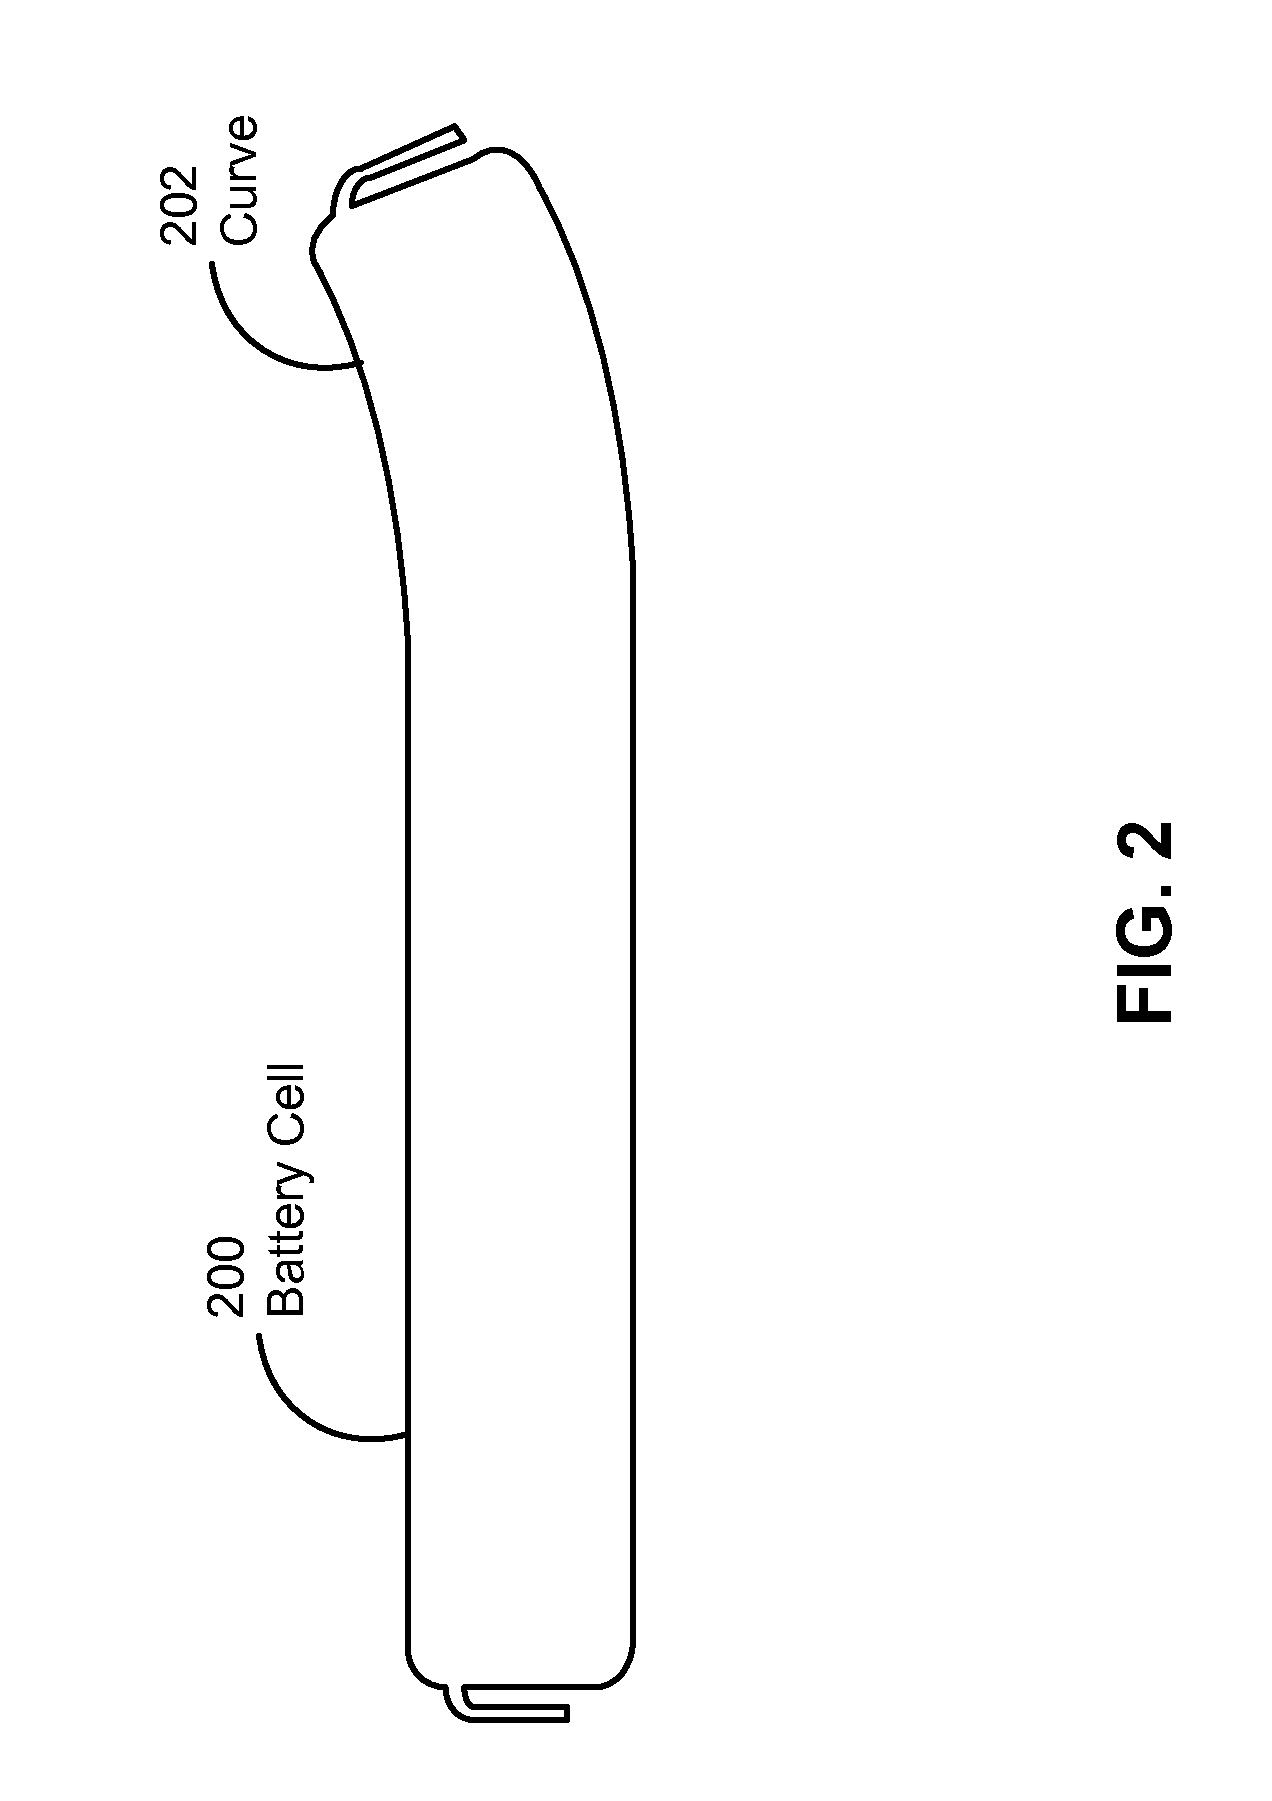 Curved battery cells for portable electronic devices